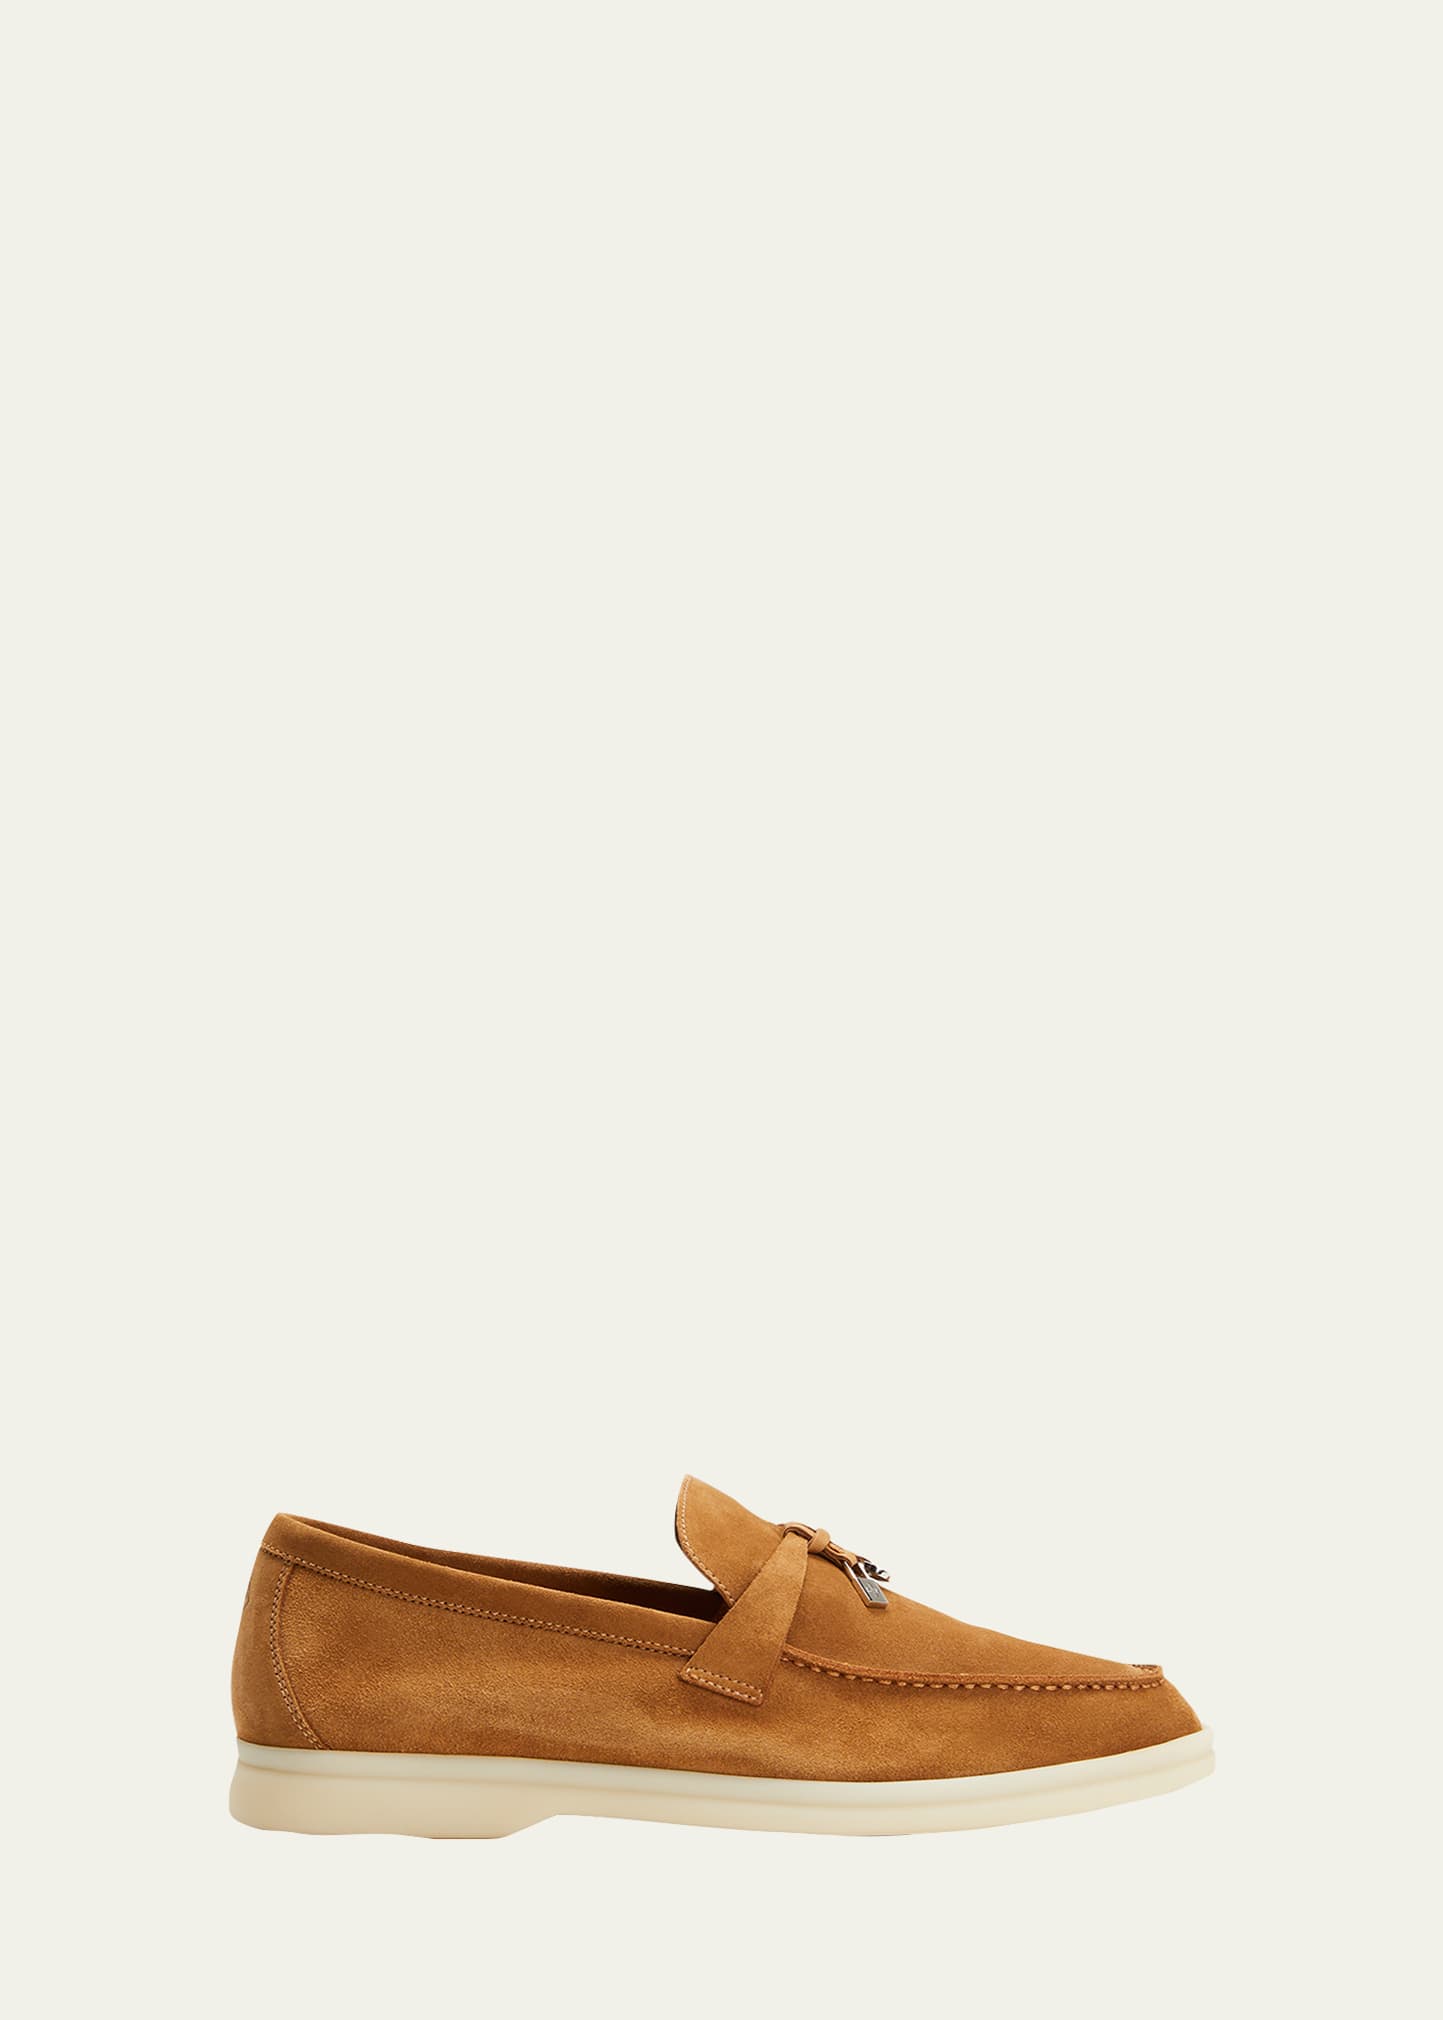 Loro Piana Summer Charms Walk Suede Loafers In Sand